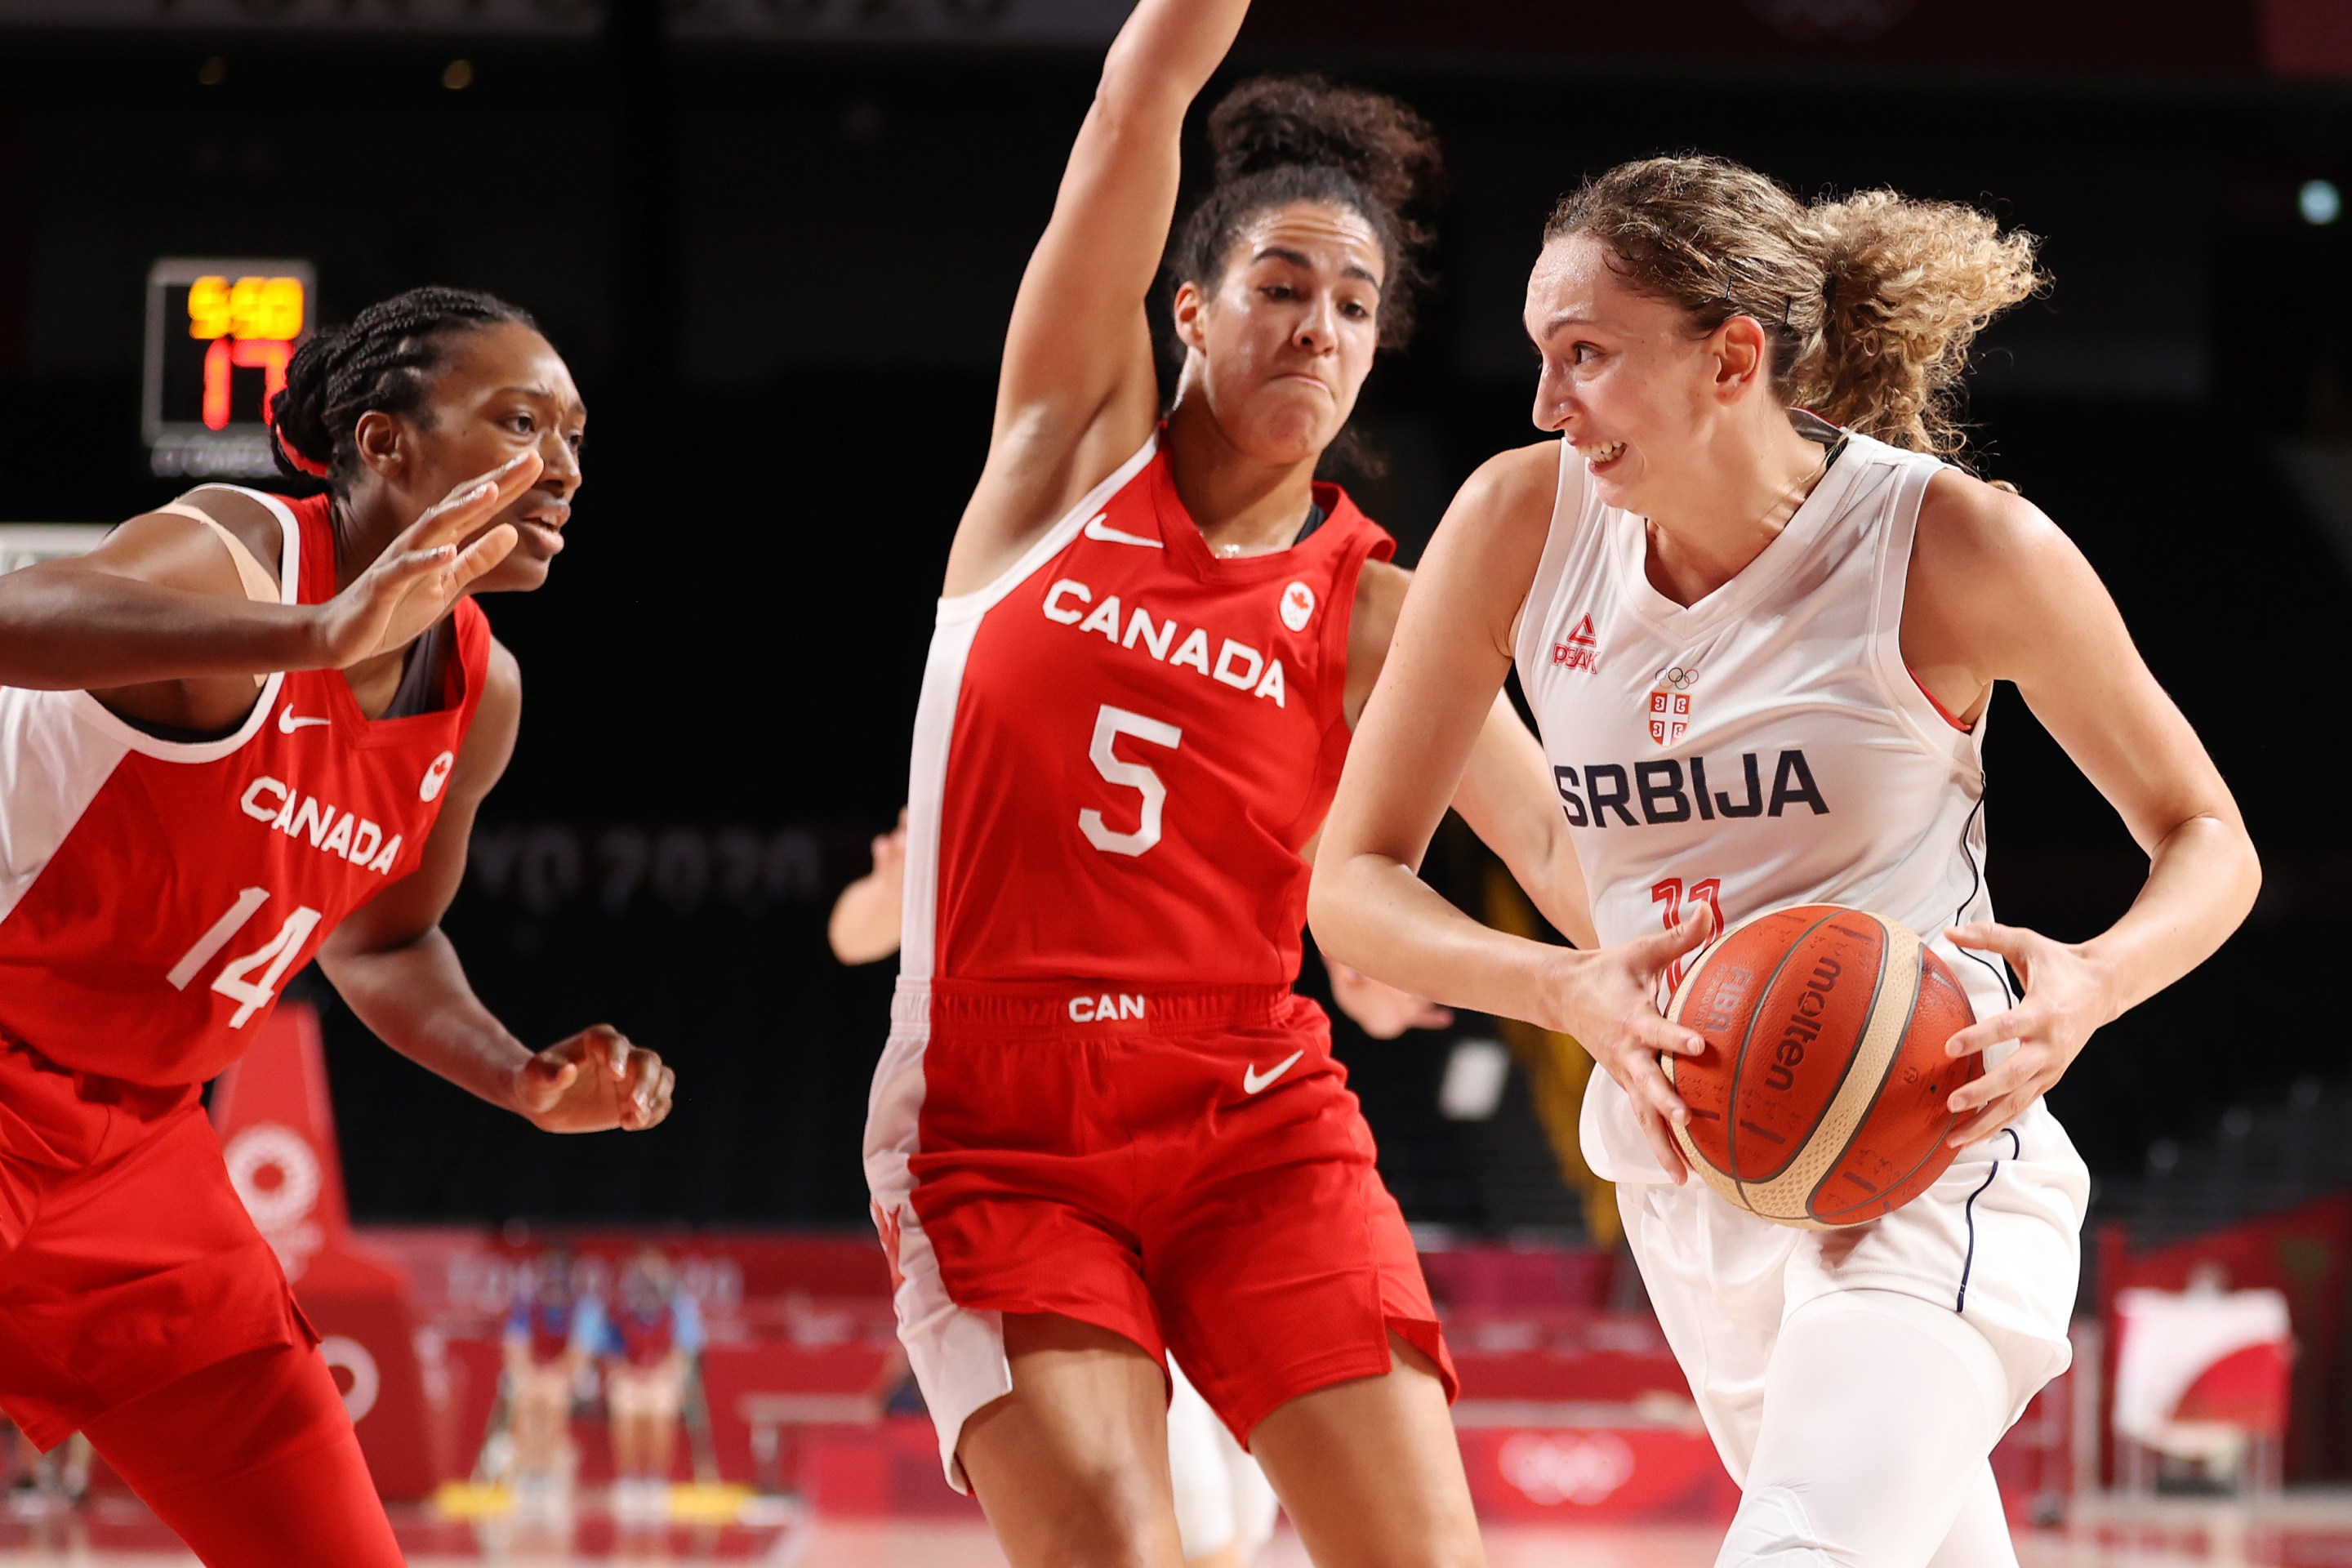 Aleksandra Crvendakic #11 of Team Serbia drives to the basket against Kayla Alexander #14 and Kia Nurse #5 of Team Canada during the first half of the Women's Preliminary Round Group A game on day three of the Tokyo 2020 Olympic Games at Saitama Super Arena on July 26, 2021 in Saitama, Japan.